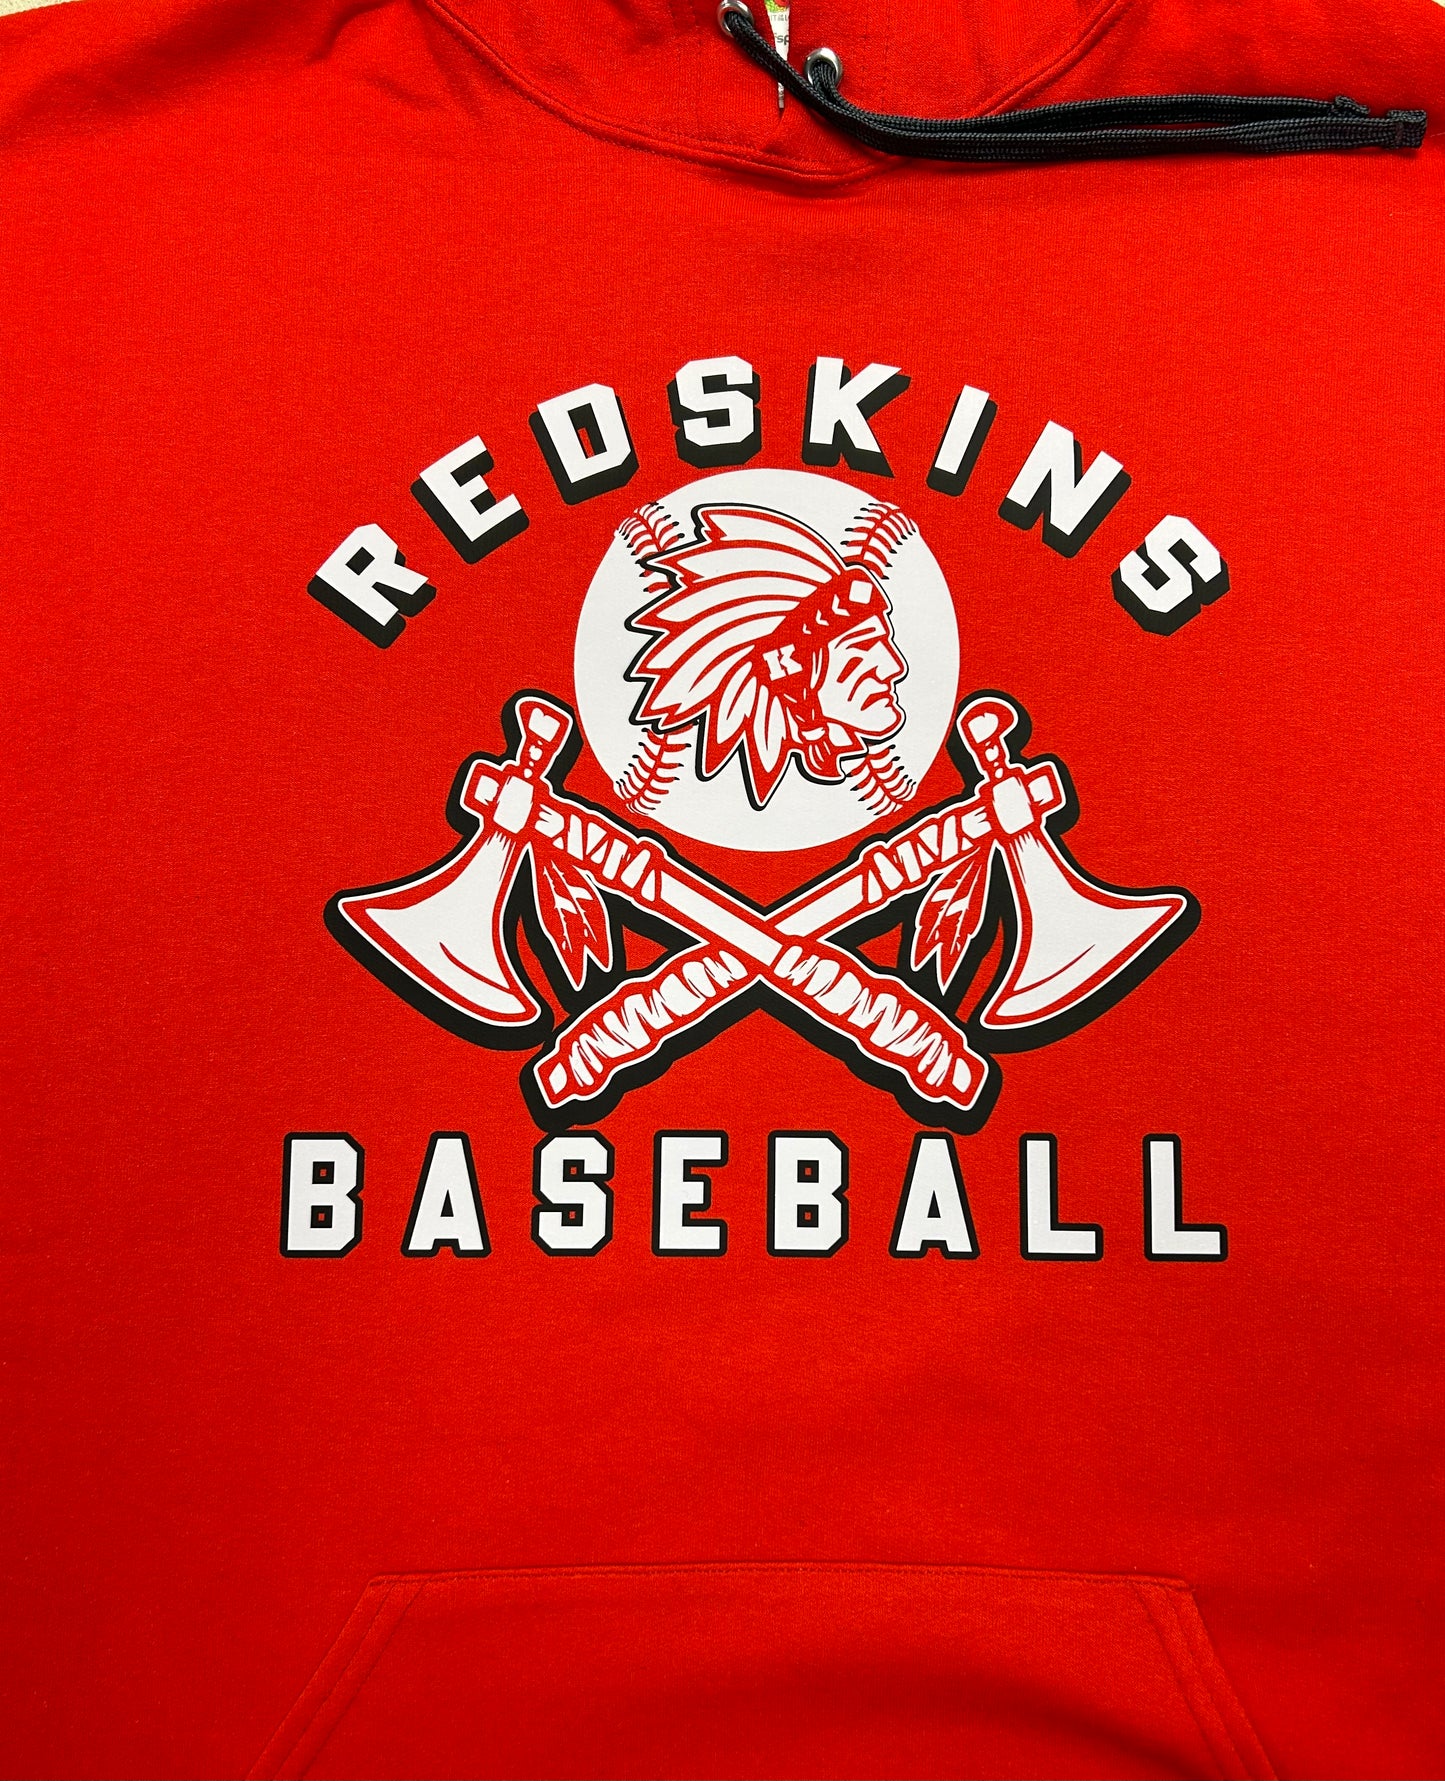 Knox Redskins Baseball Tomahawk T-shirt - Red - Adult and Youth Sizes